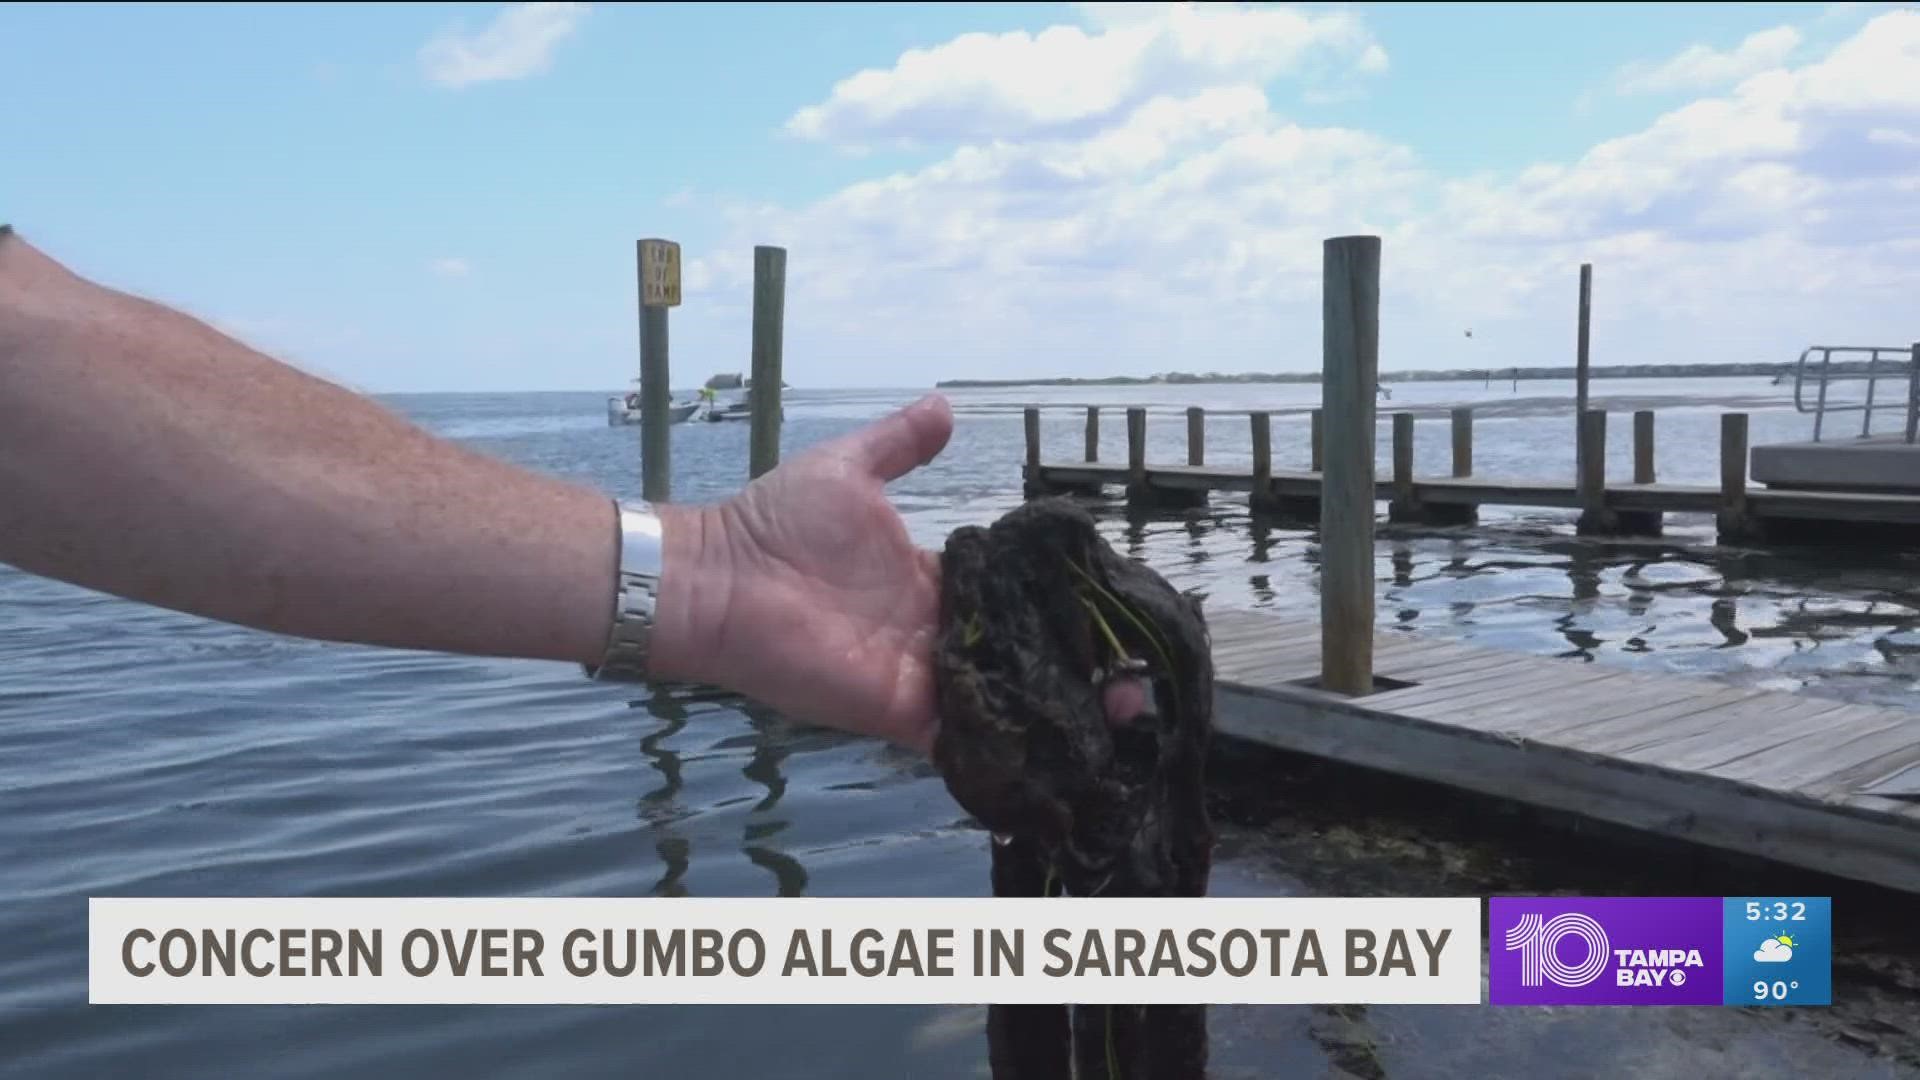 Divers found the presence of a very substantial amount of macroalgae on the bottom of the bay at 10 sites in upper Sarasota Bay.